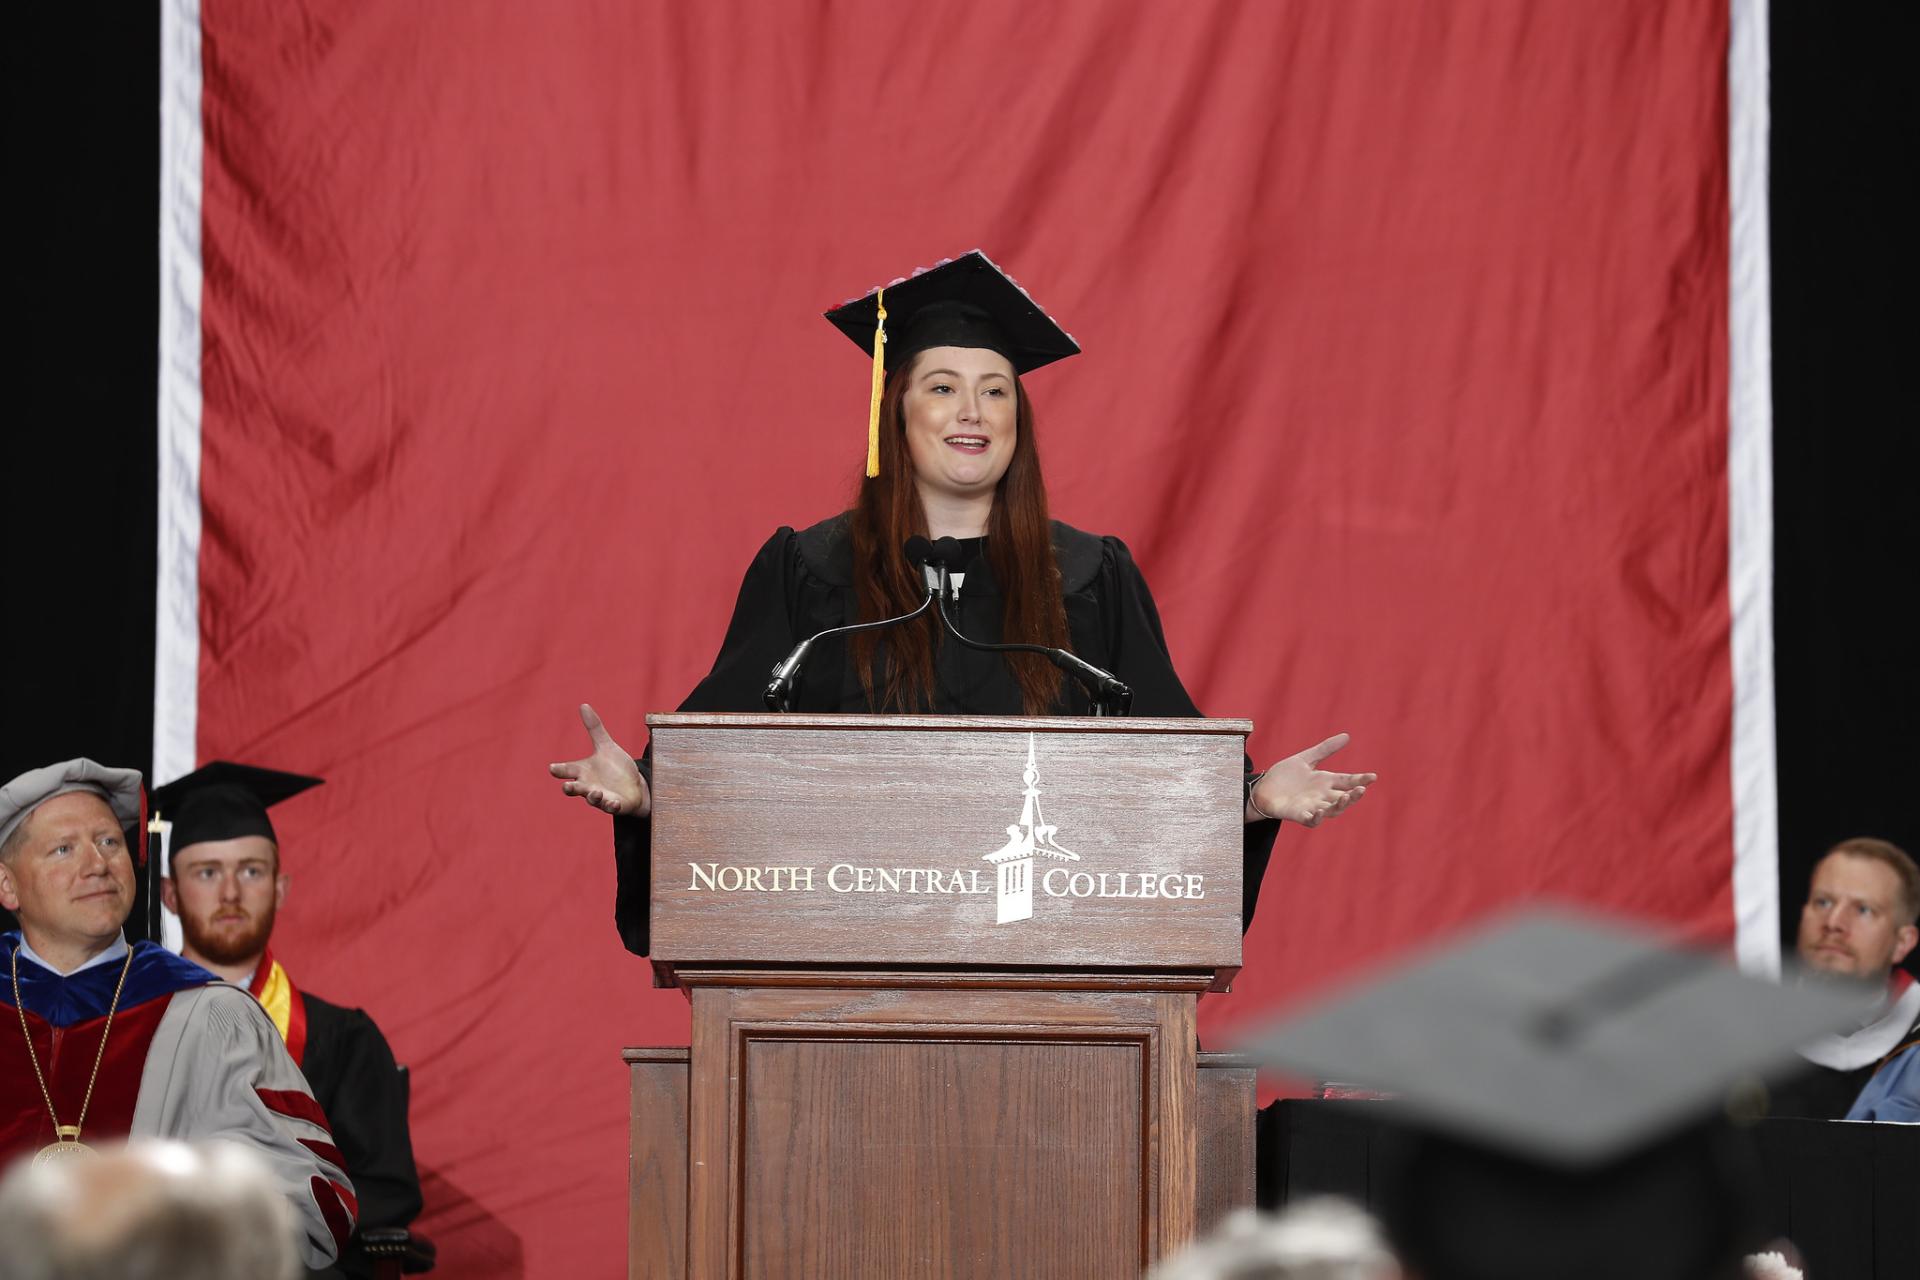 North Central College Commencement speaker Norah Flaherty.